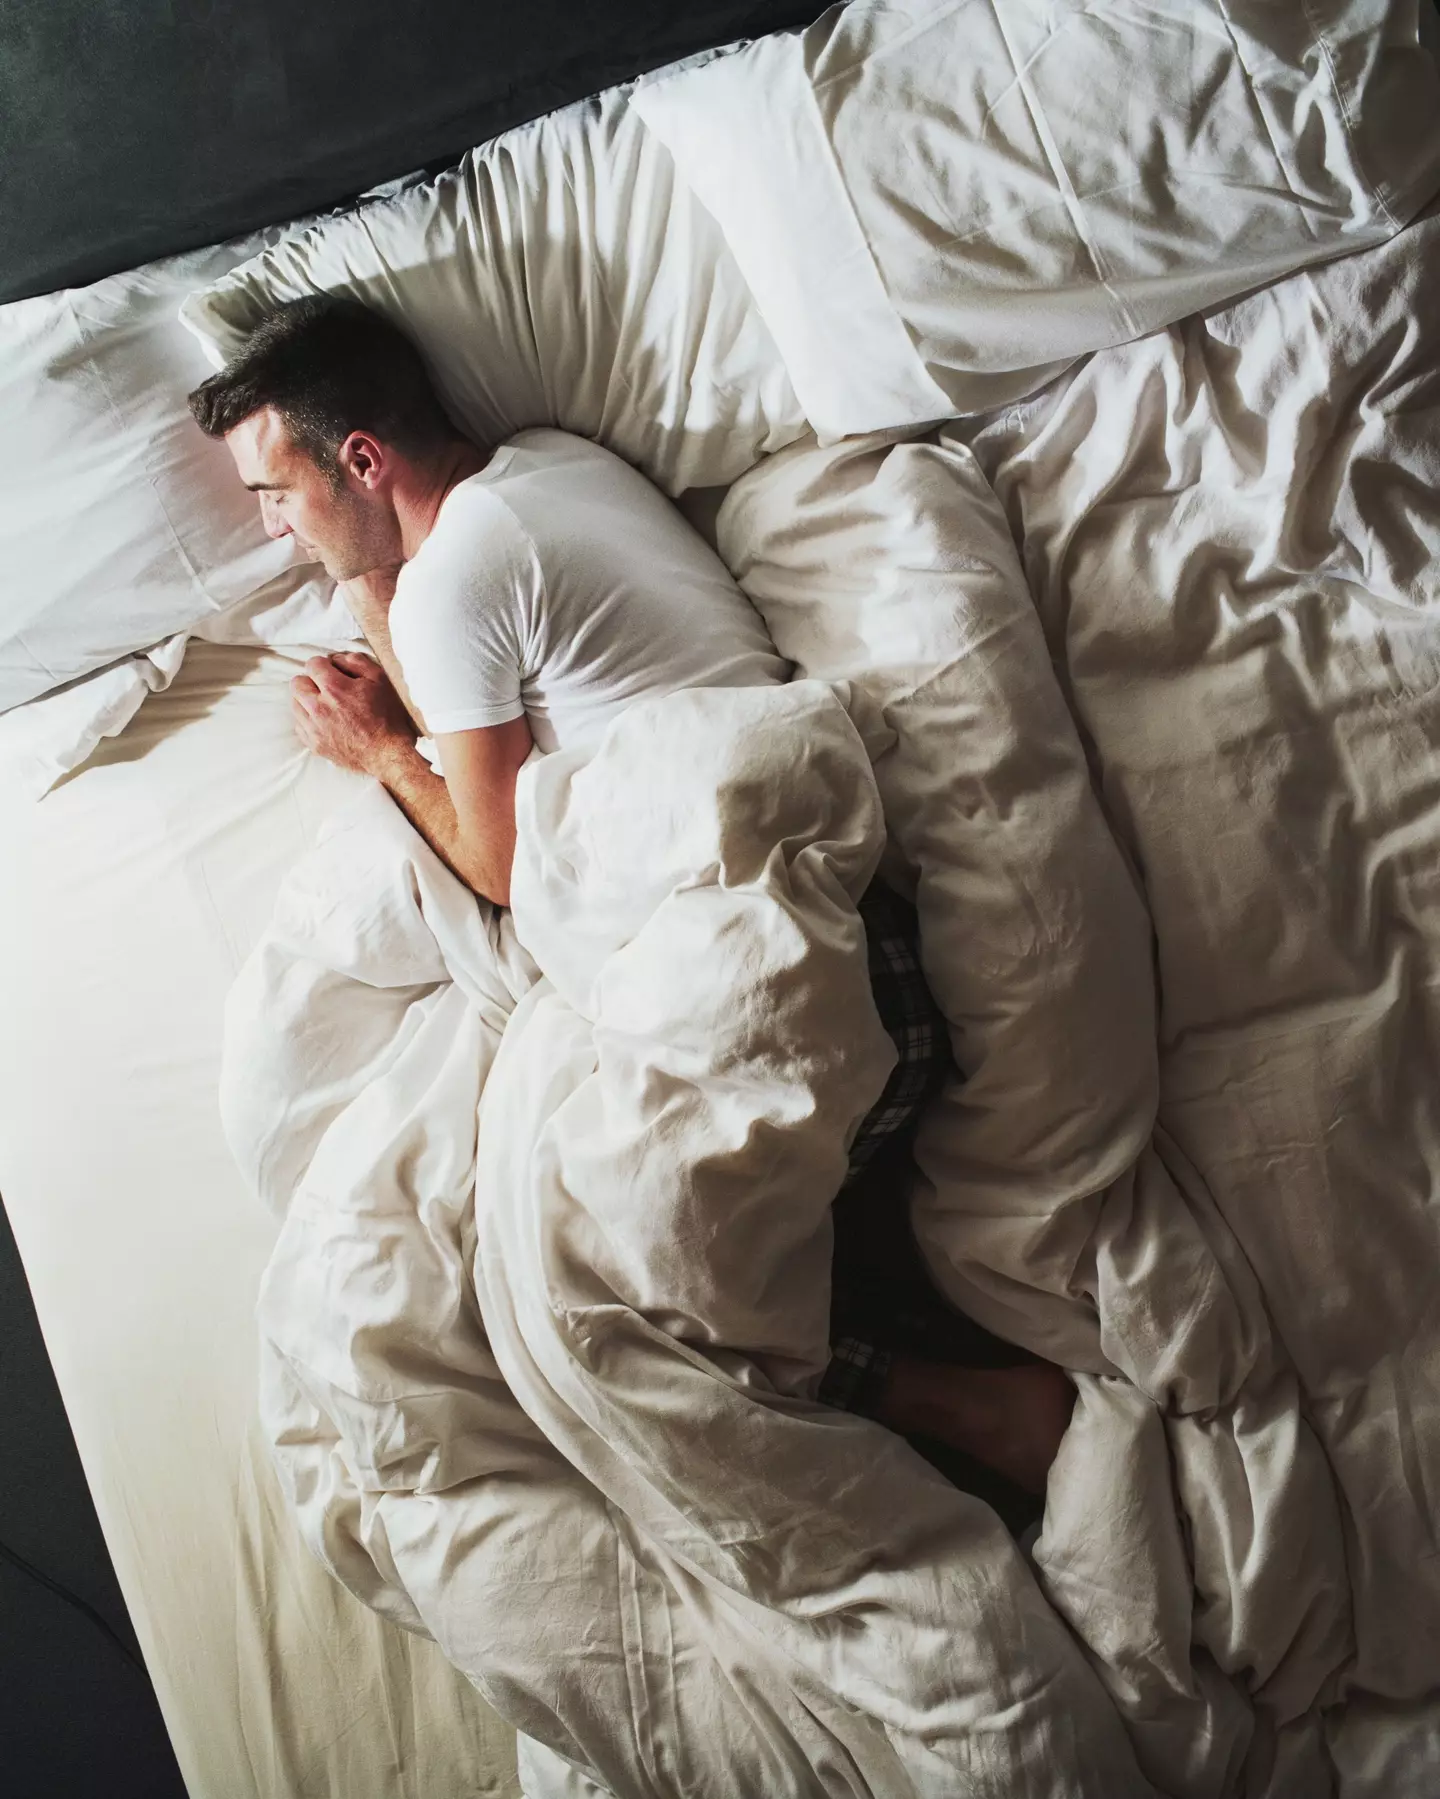 A sleep expert has urged people not to ignore one common symptom.